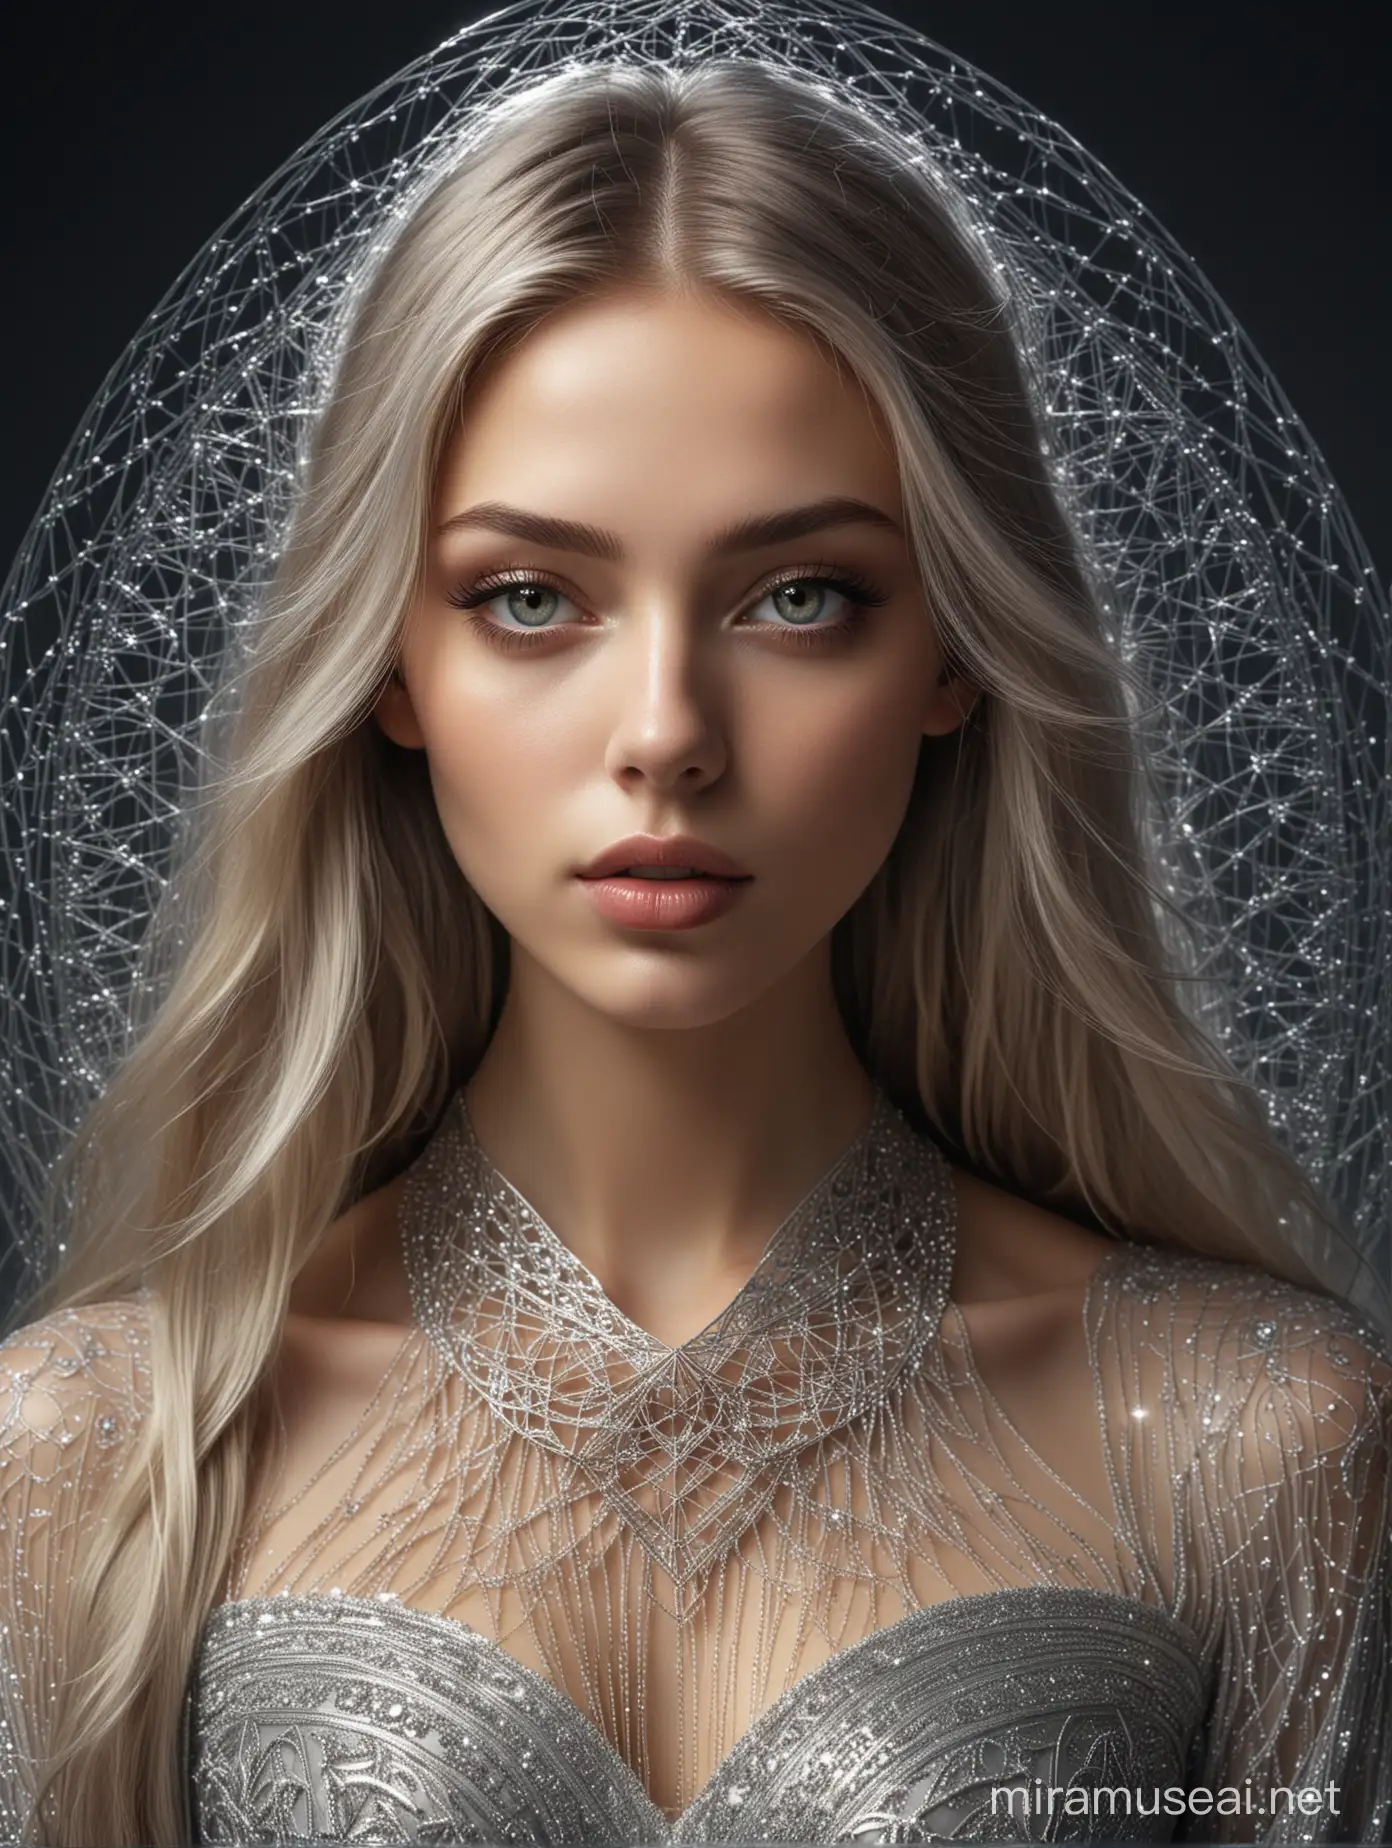 Exquisite Symmetrical Portrait of a Radiant Young Goddess with Sparkling Silver Eyes and Flowing Gown